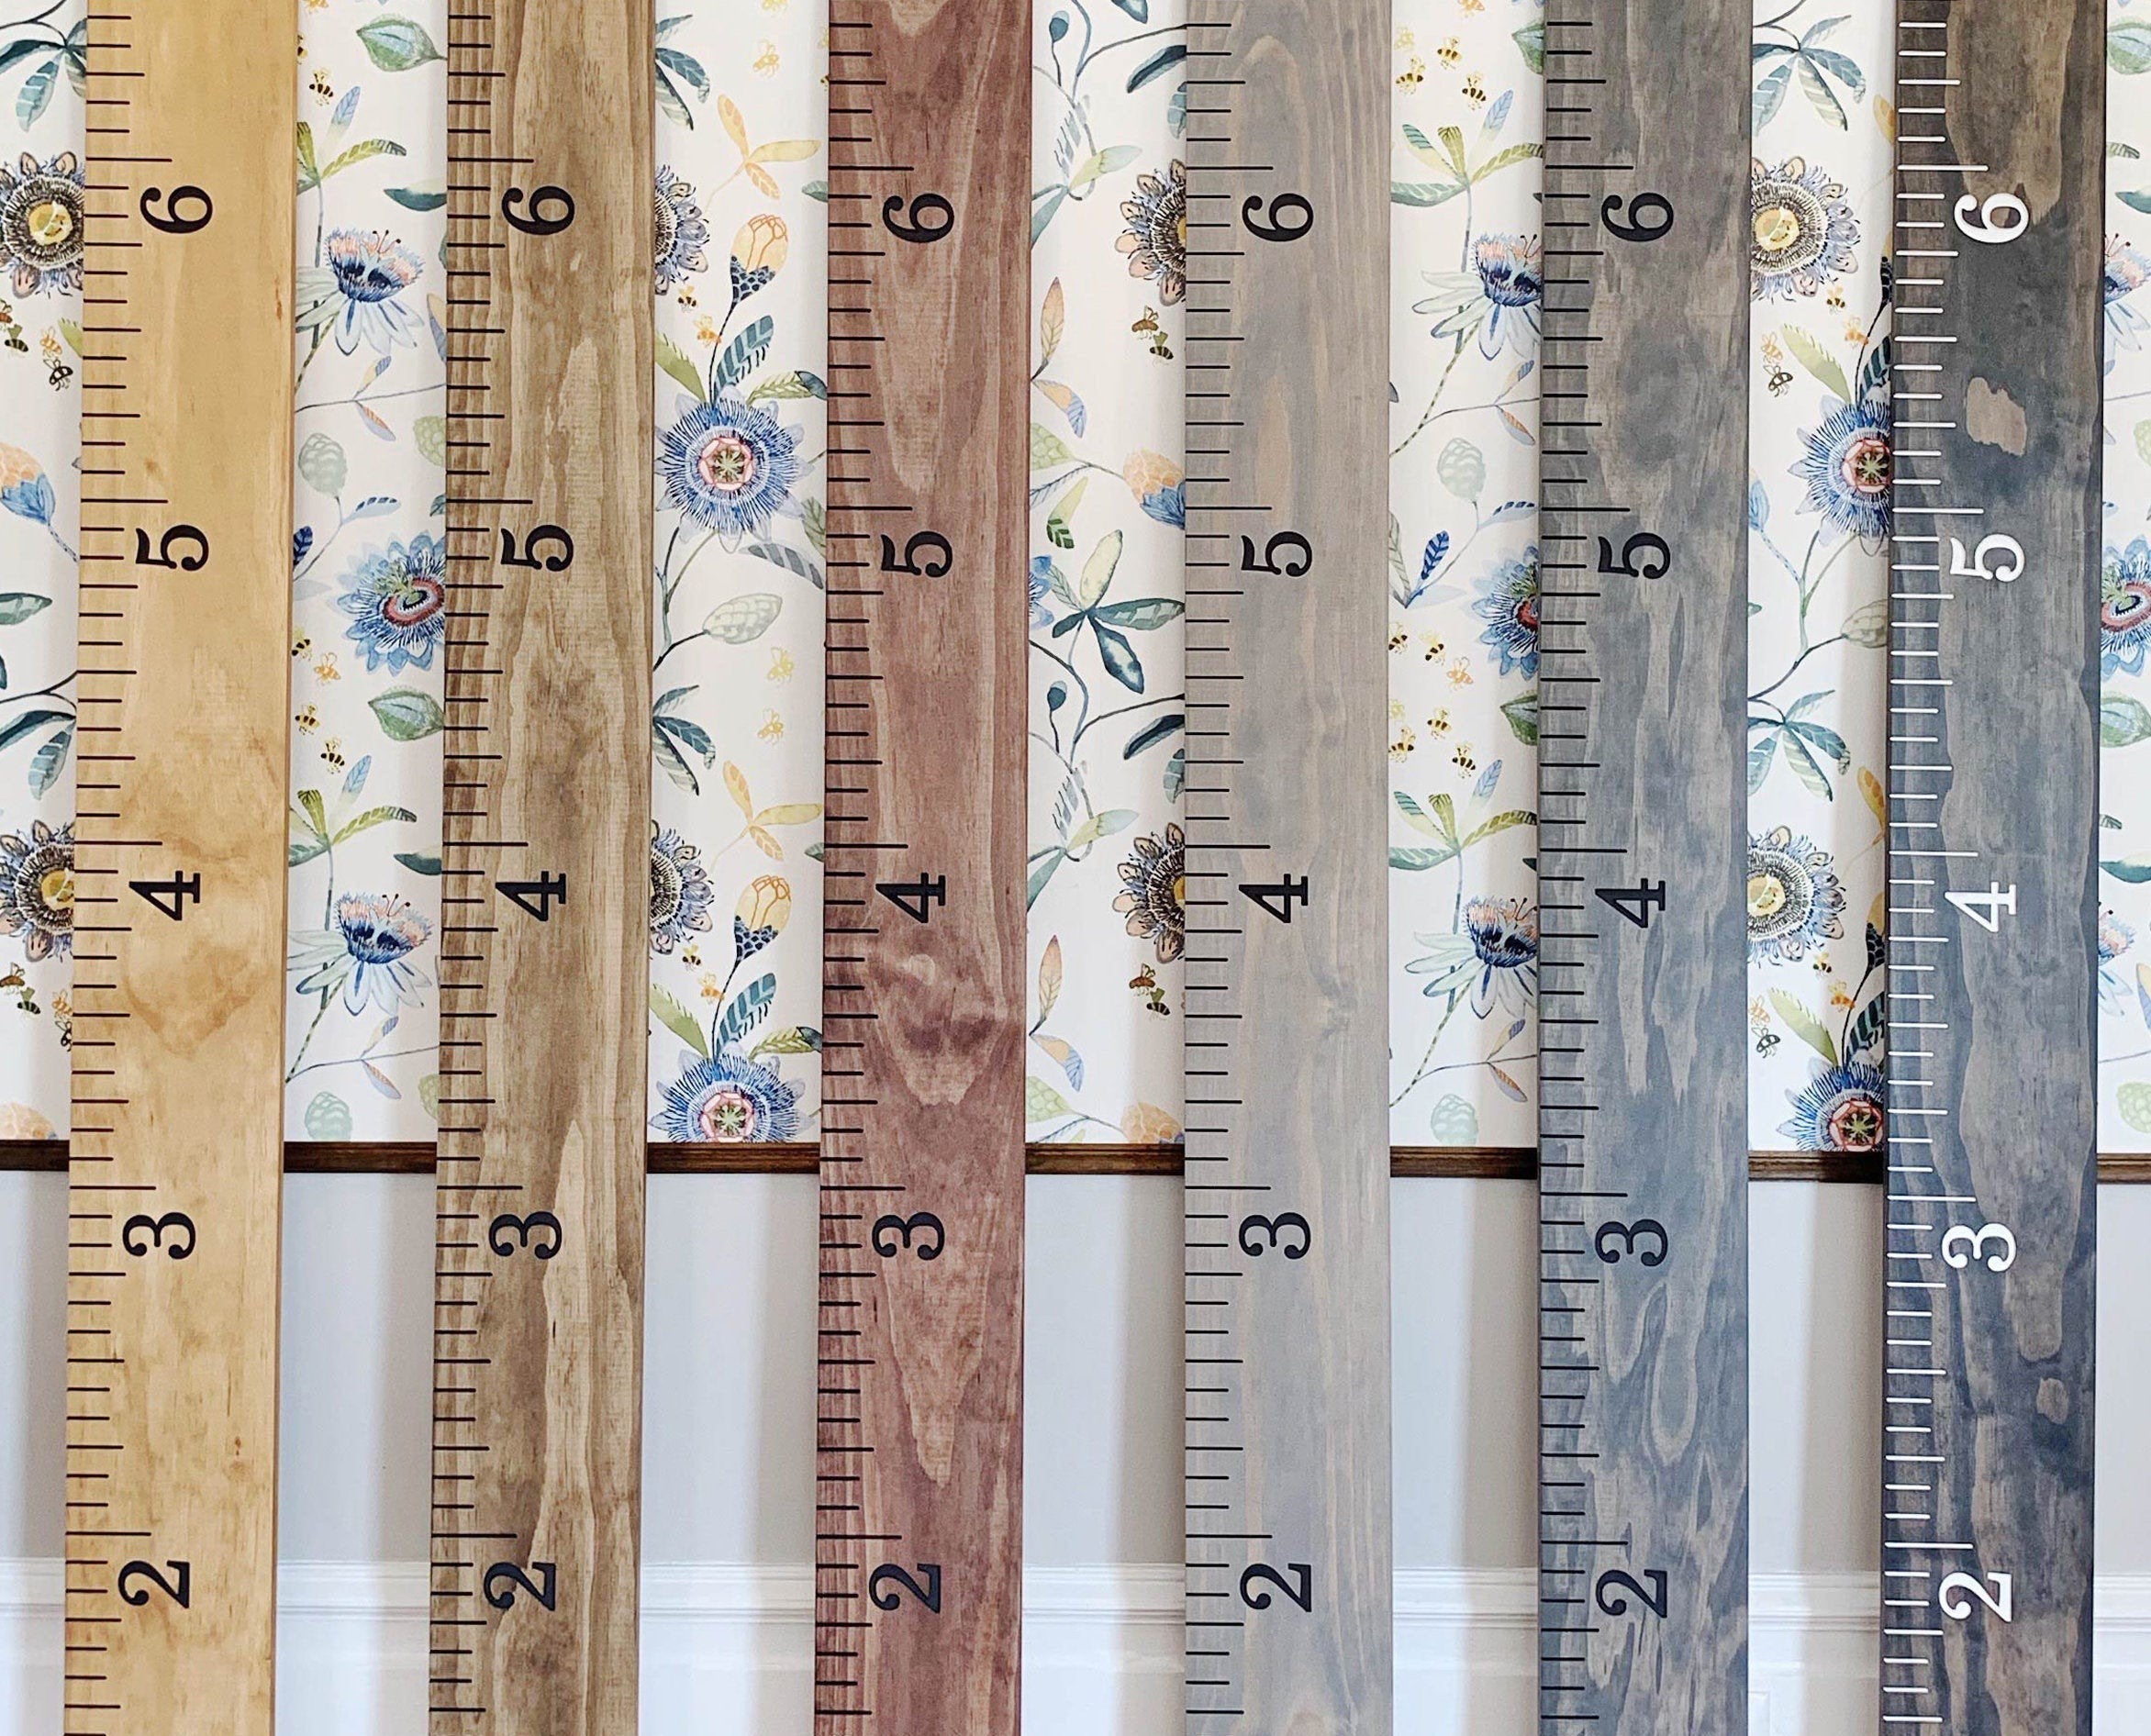 6 Inch Ruler Measurements, Engraved Growth Chart, Half Pint Ink